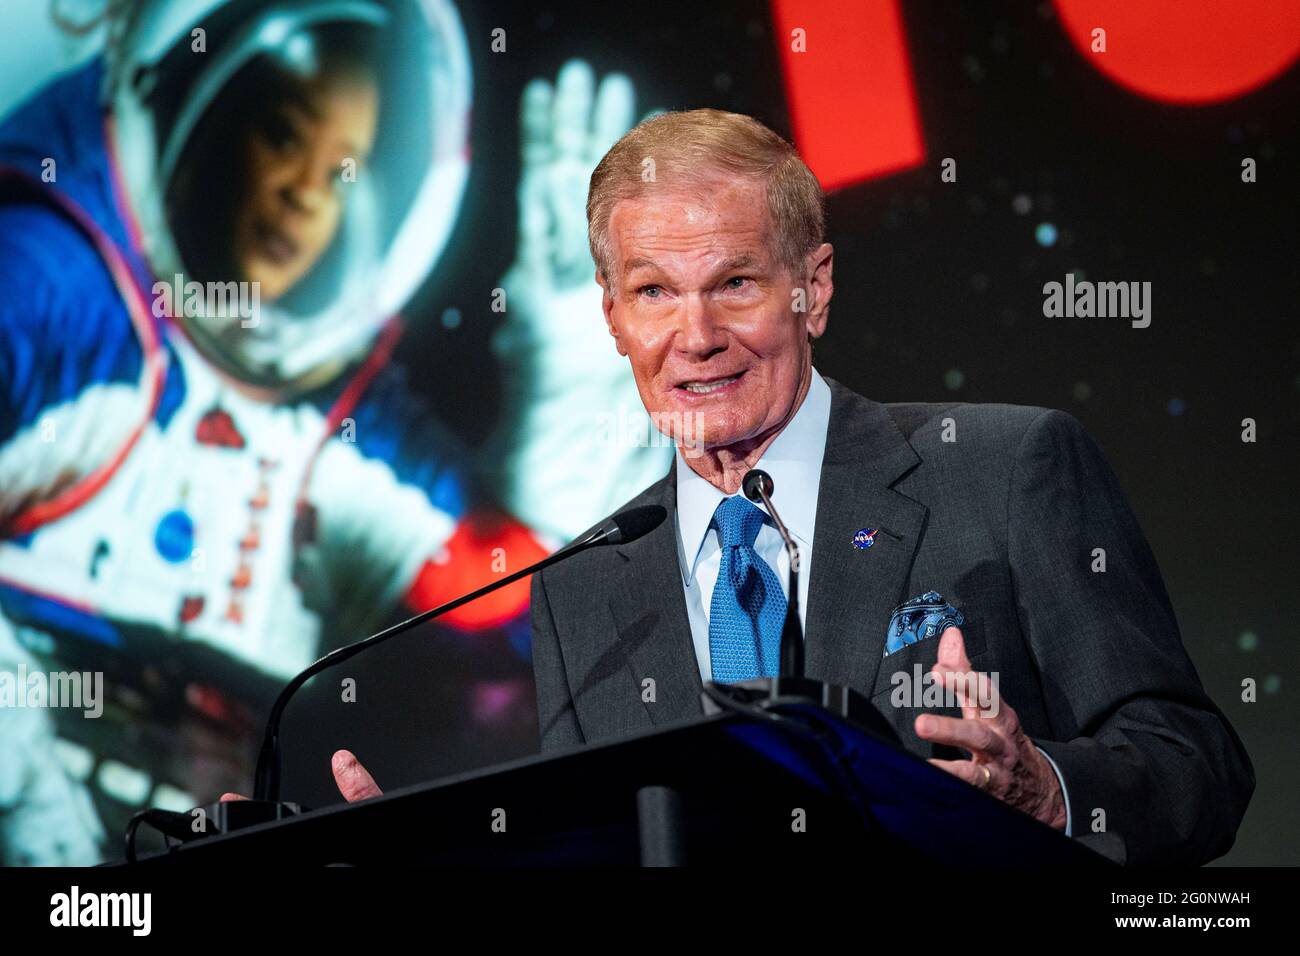 NASA Administrator Bill Nelson speaks during a 'State of NASA' address, as he announces the new DAVINCI+ and VERITAS space missions to study Venus, at NASA headquarters in Washington, U.S., June 2, 2021. REUTERS/Al Drago Stock Photo